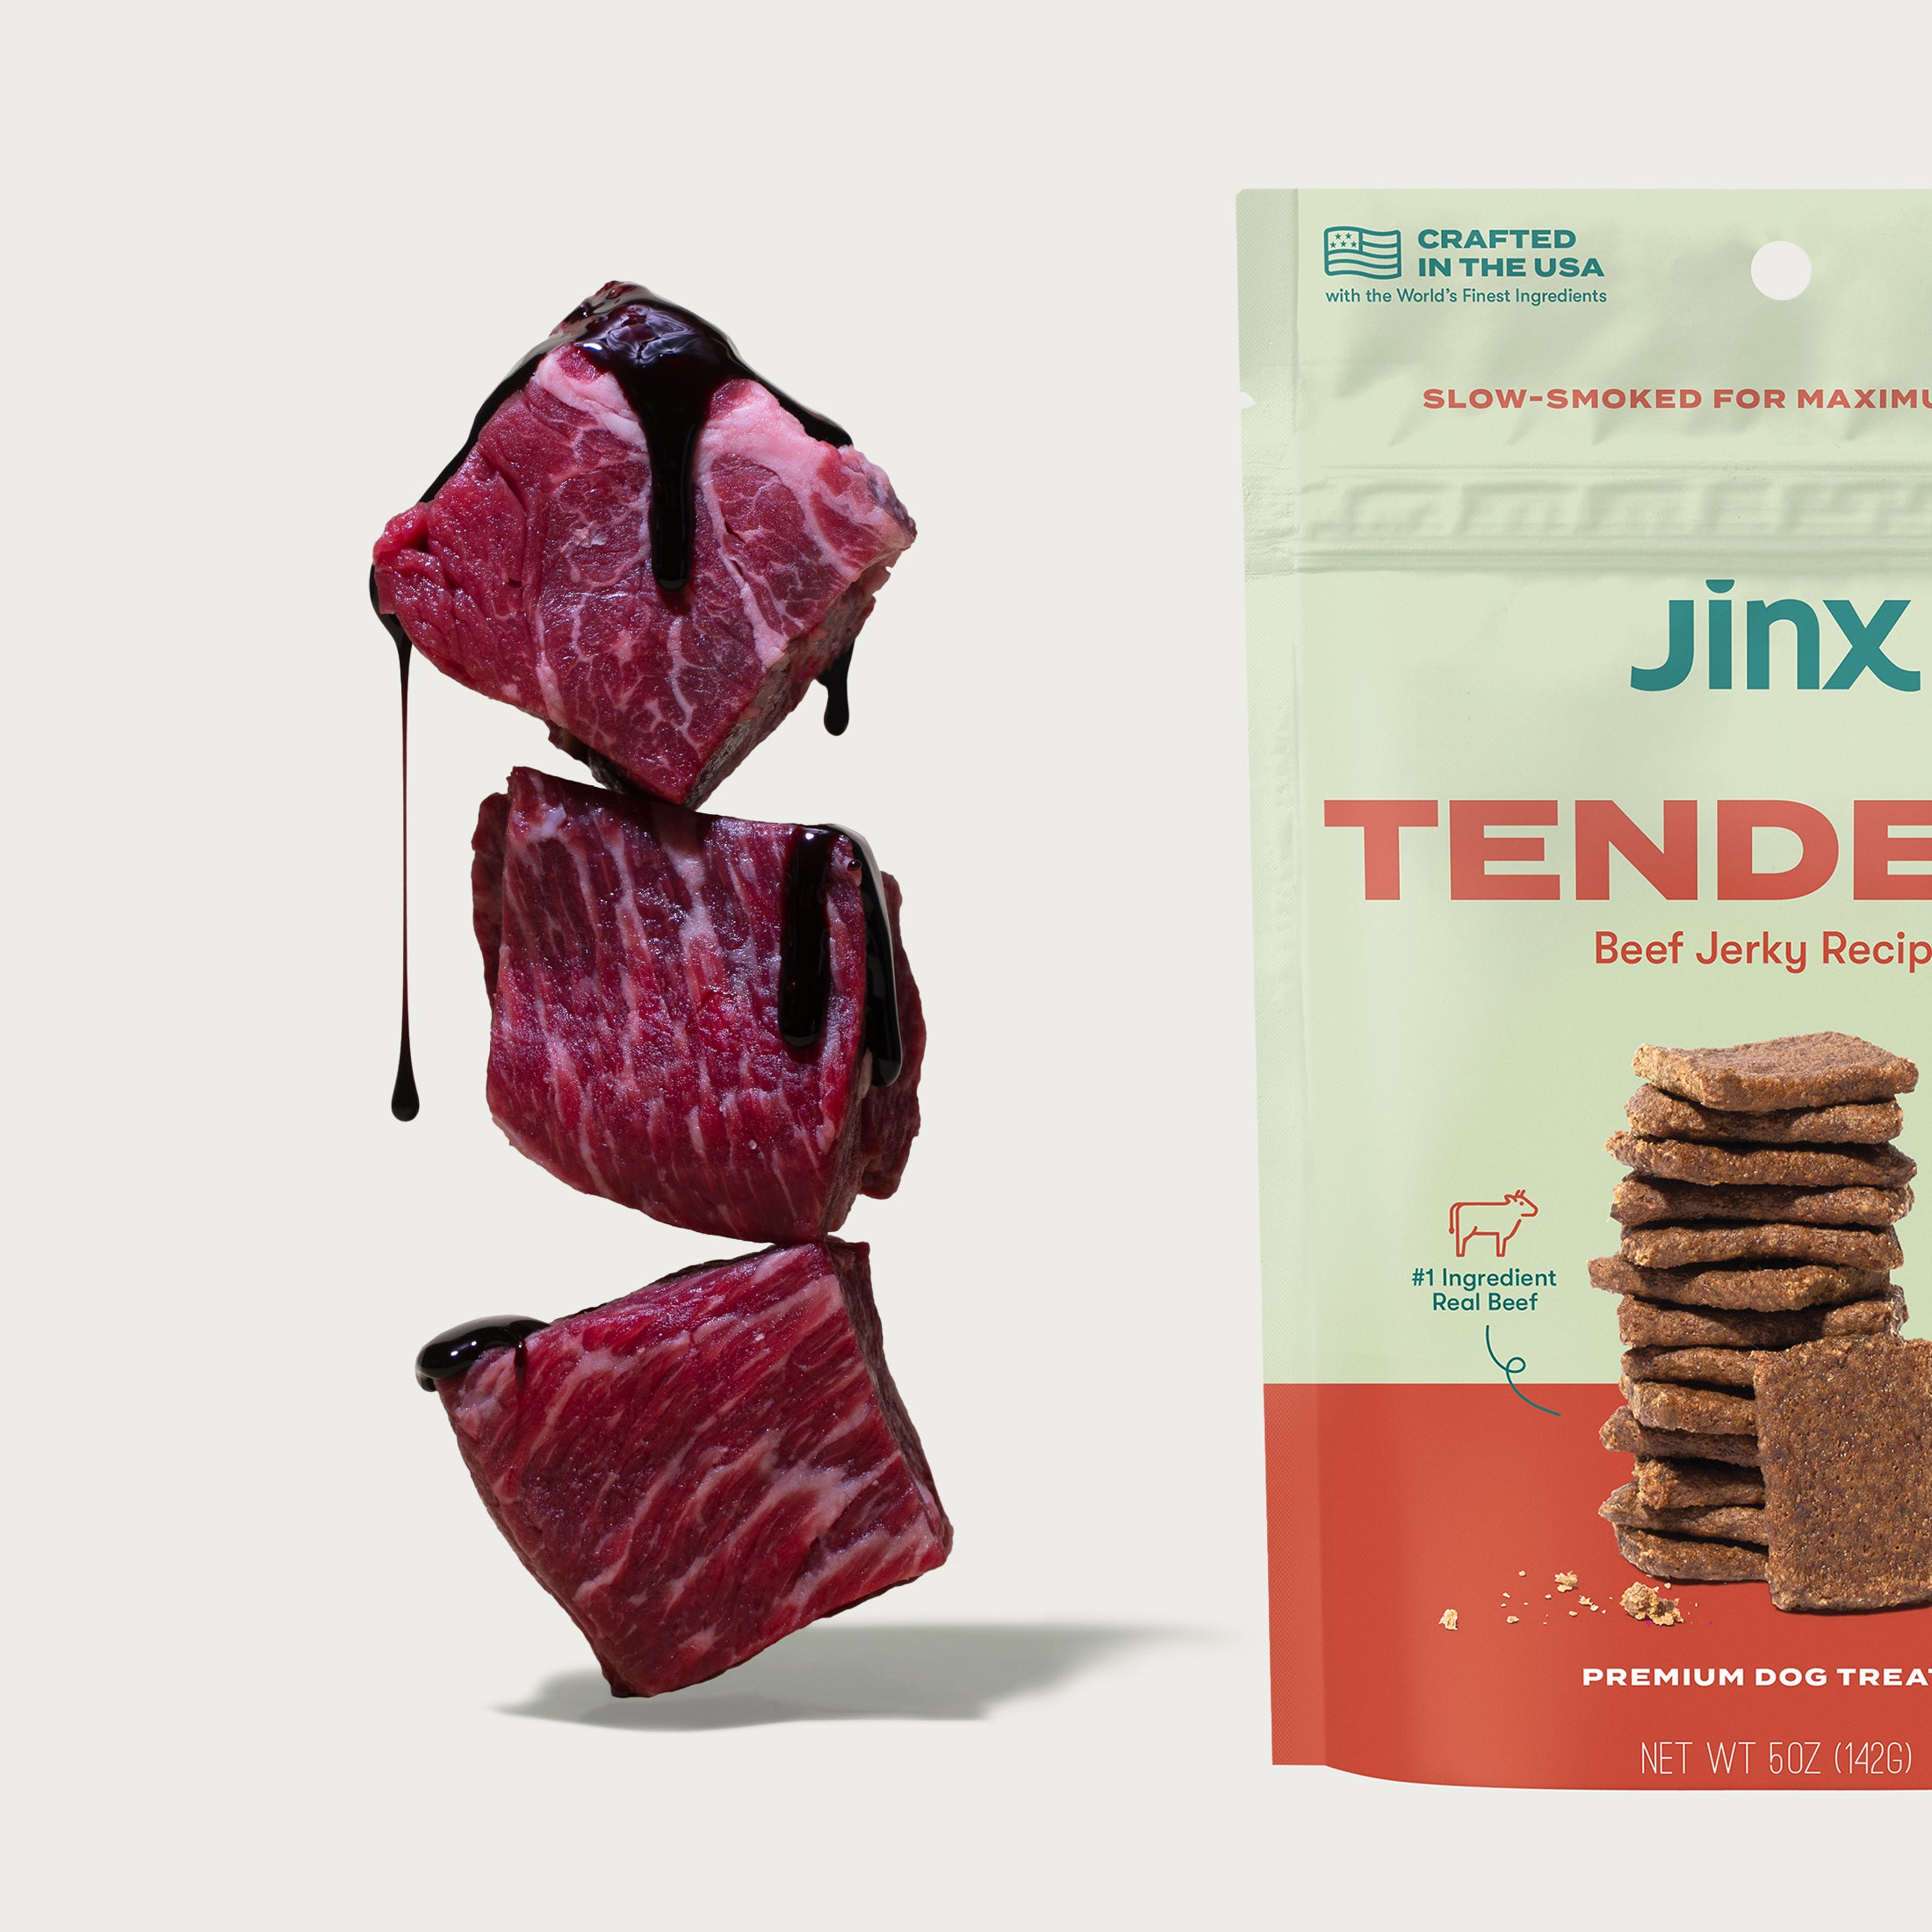 cubes of raw beef stacked on the left and image of jinx beef tenders packaging to the right